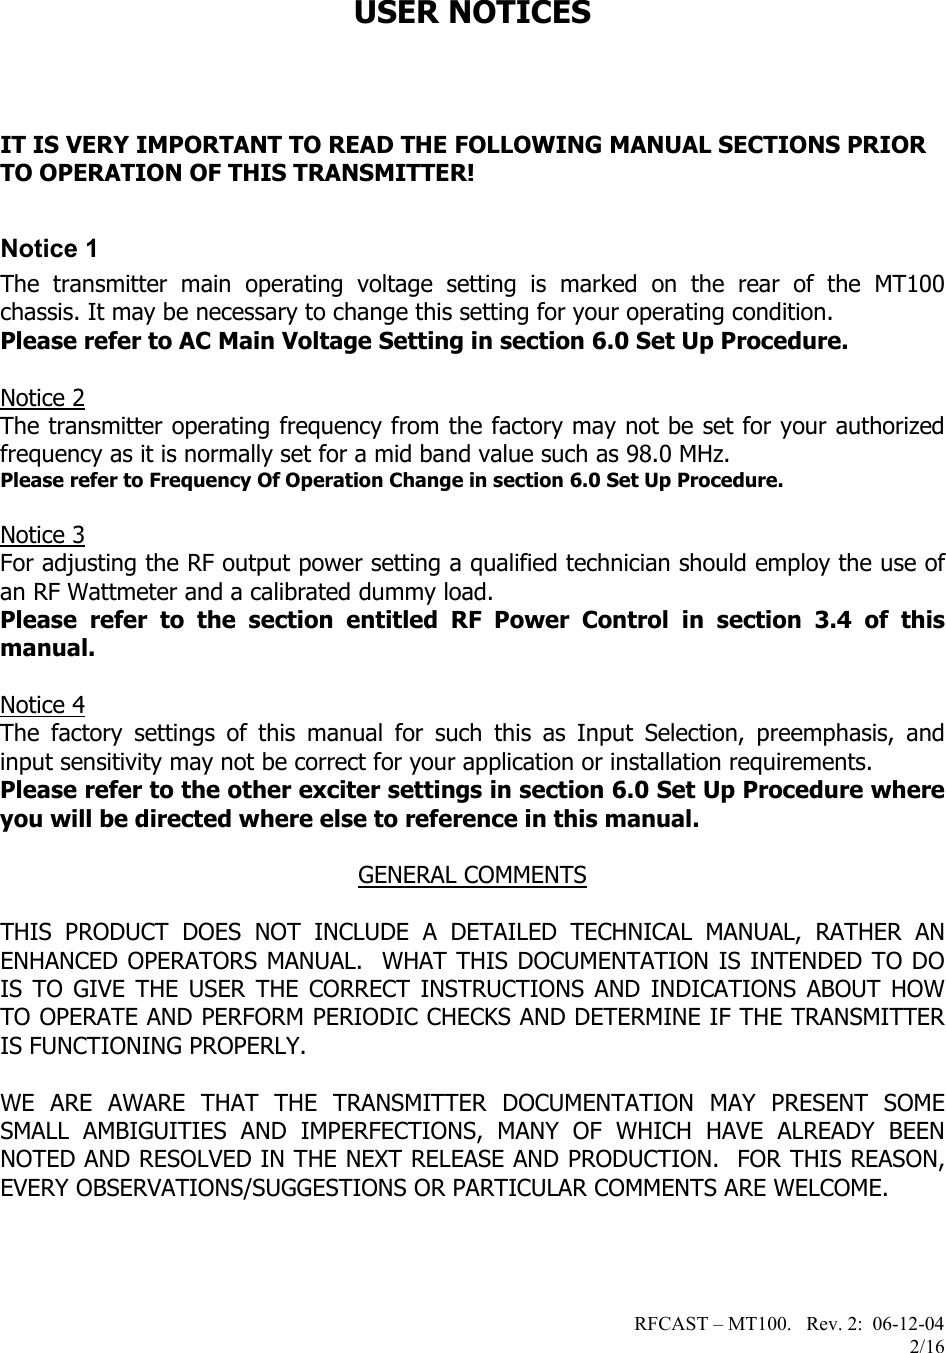 RFCAST – MT100.   Rev. 2:  06-12-04                       2/16   USER NOTICES    IT IS VERY IMPORTANT TO READ THE FOLLOWING MANUAL SECTIONS PRIOR TO OPERATION OF THIS TRANSMITTER!  Notice 1 The transmitter main operating voltage setting is marked on the rear of the MT100 chassis. It may be necessary to change this setting for your operating condition.   Please refer to AC Main Voltage Setting in section 6.0 Set Up Procedure.  Notice 2 The transmitter operating frequency from the factory may not be set for your authorized frequency as it is normally set for a mid band value such as 98.0 MHz. Please refer to Frequency Of Operation Change in section 6.0 Set Up Procedure.  Notice 3 For adjusting the RF output power setting a qualified technician should employ the use of an RF Wattmeter and a calibrated dummy load. Please refer to the section entitled RF Power Control in section 3.4 of this manual.  Notice 4 The factory settings of this manual for such this as Input Selection, preemphasis, and input sensitivity may not be correct for your application or installation requirements. Please refer to the other exciter settings in section 6.0 Set Up Procedure where you will be directed where else to reference in this manual.  GENERAL COMMENTS  THIS PRODUCT DOES NOT INCLUDE A DETAILED TECHNICAL MANUAL, RATHER AN ENHANCED OPERATORS MANUAL.  WHAT THIS DOCUMENTATION IS INTENDED TO DO IS TO GIVE THE USER THE CORRECT INSTRUCTIONS AND INDICATIONS ABOUT HOW TO OPERATE AND PERFORM PERIODIC CHECKS AND DETERMINE IF THE TRANSMITTER IS FUNCTIONING PROPERLY.   WE ARE AWARE THAT THE TRANSMITTER DOCUMENTATION MAY PRESENT SOME SMALL AMBIGUITIES AND IMPERFECTIONS, MANY OF WHICH HAVE ALREADY BEEN NOTED AND RESOLVED IN THE NEXT RELEASE AND PRODUCTION.  FOR THIS REASON, EVERY OBSERVATIONS/SUGGESTIONS OR PARTICULAR COMMENTS ARE WELCOME.  